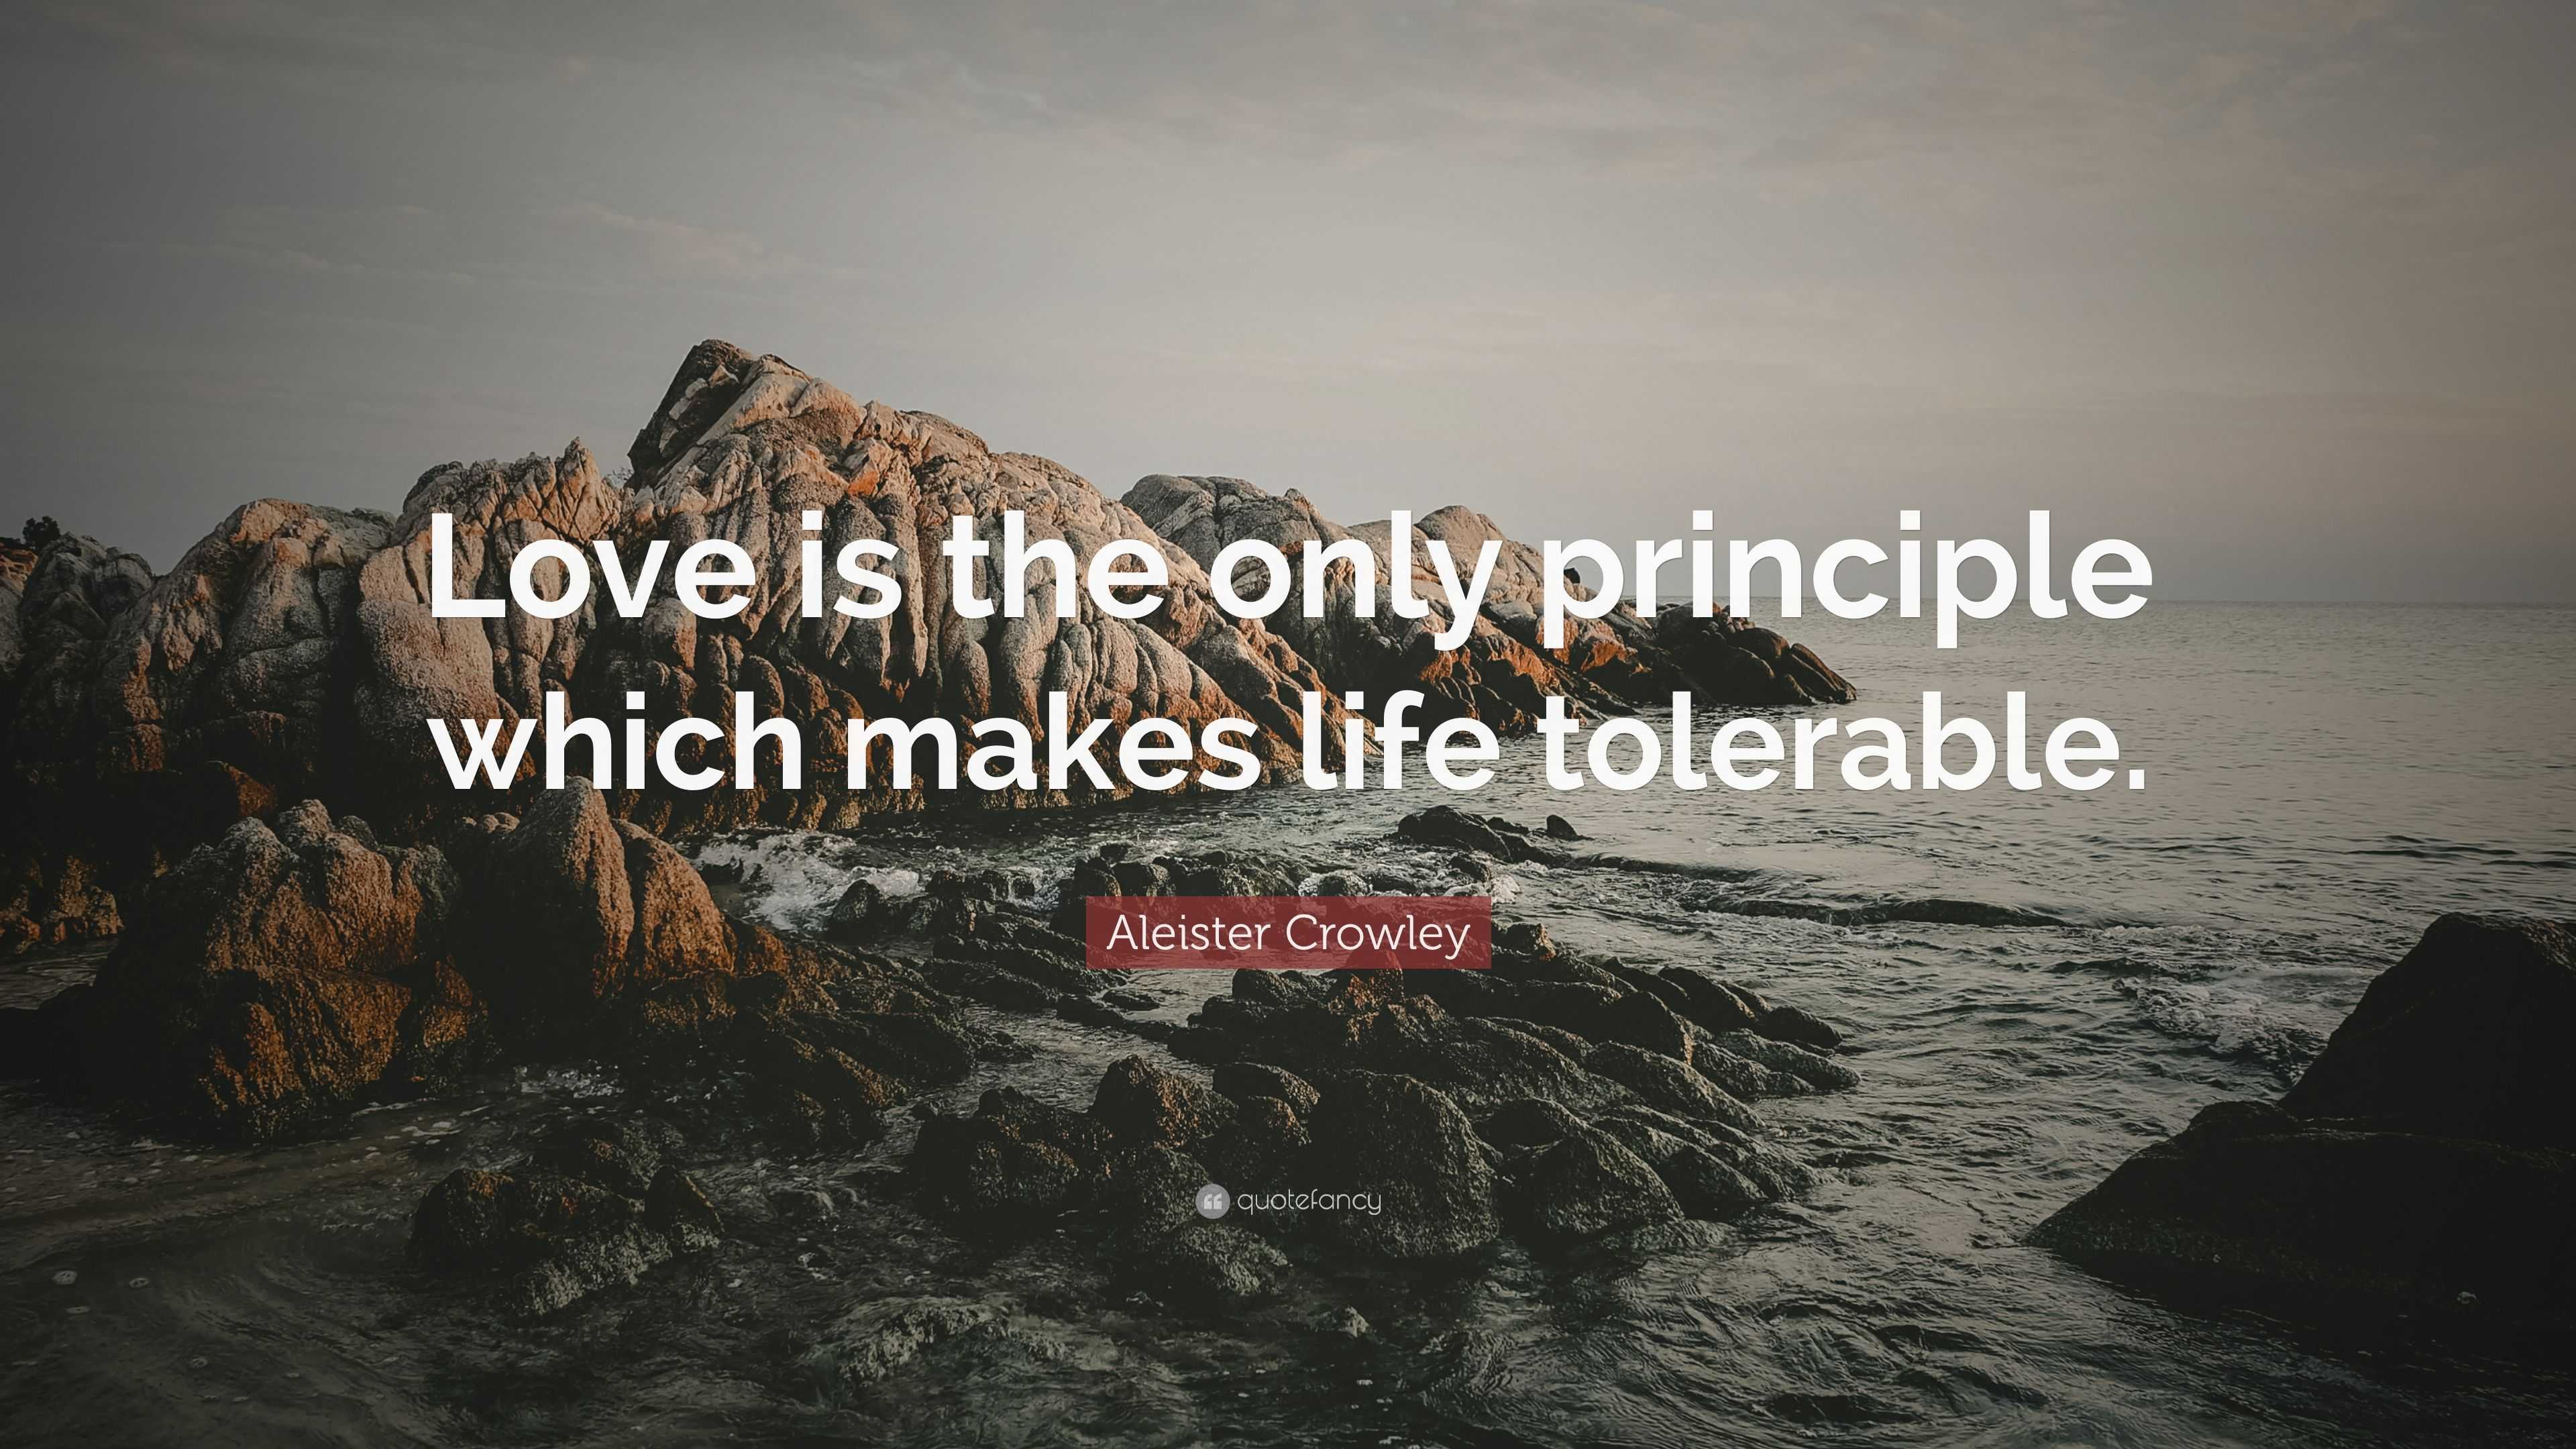 Aleister Crowley Quote: “Love is the only principle which makes life ...